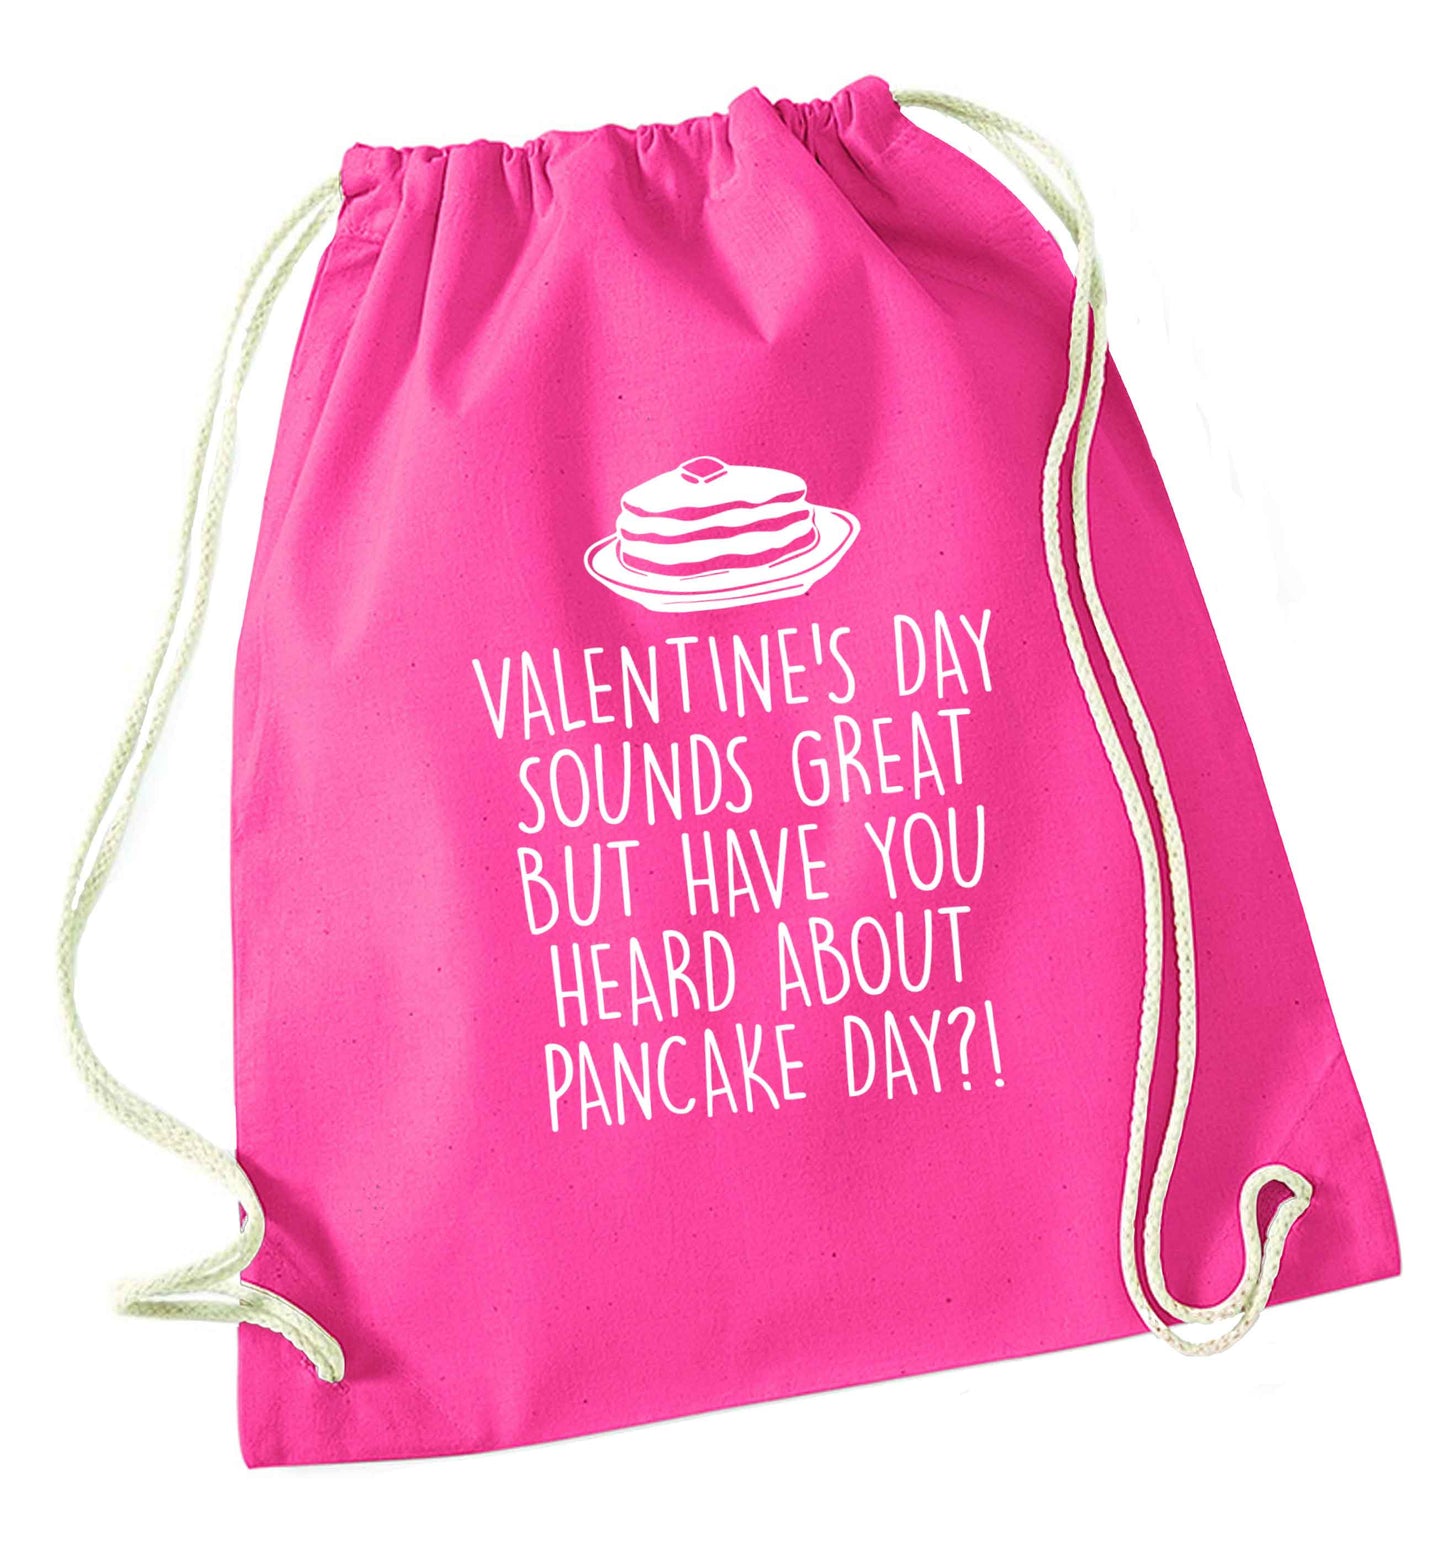 Valentine's day sounds great but have you heard about pancake day?! pink drawstring bag